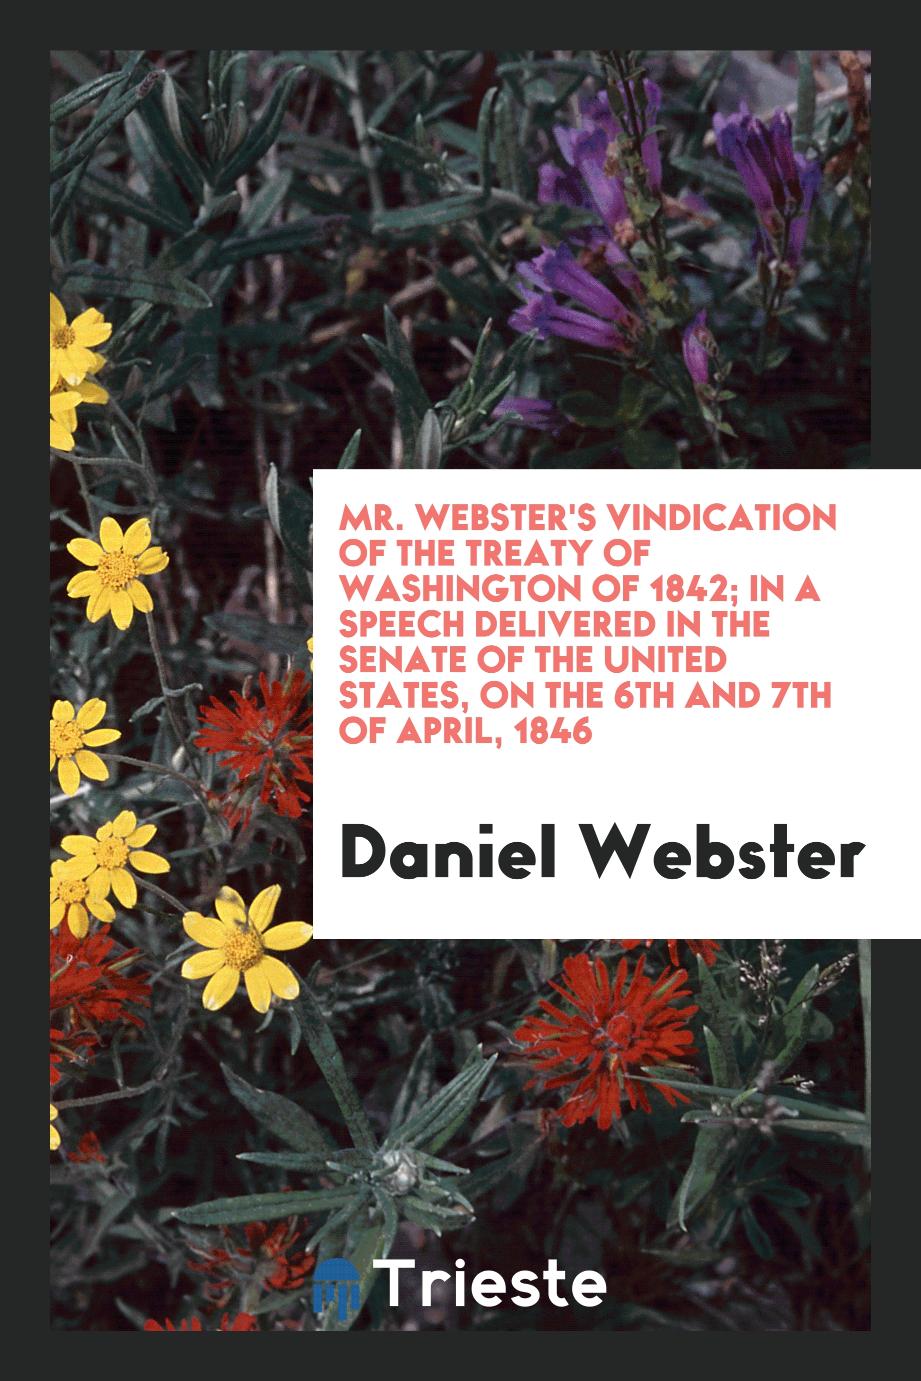 Mr. Webster's Vindication of the Treaty of Washington of 1842; In a Speech Delivered in the senate of the United States, on the 6th and 7th of april, 1846